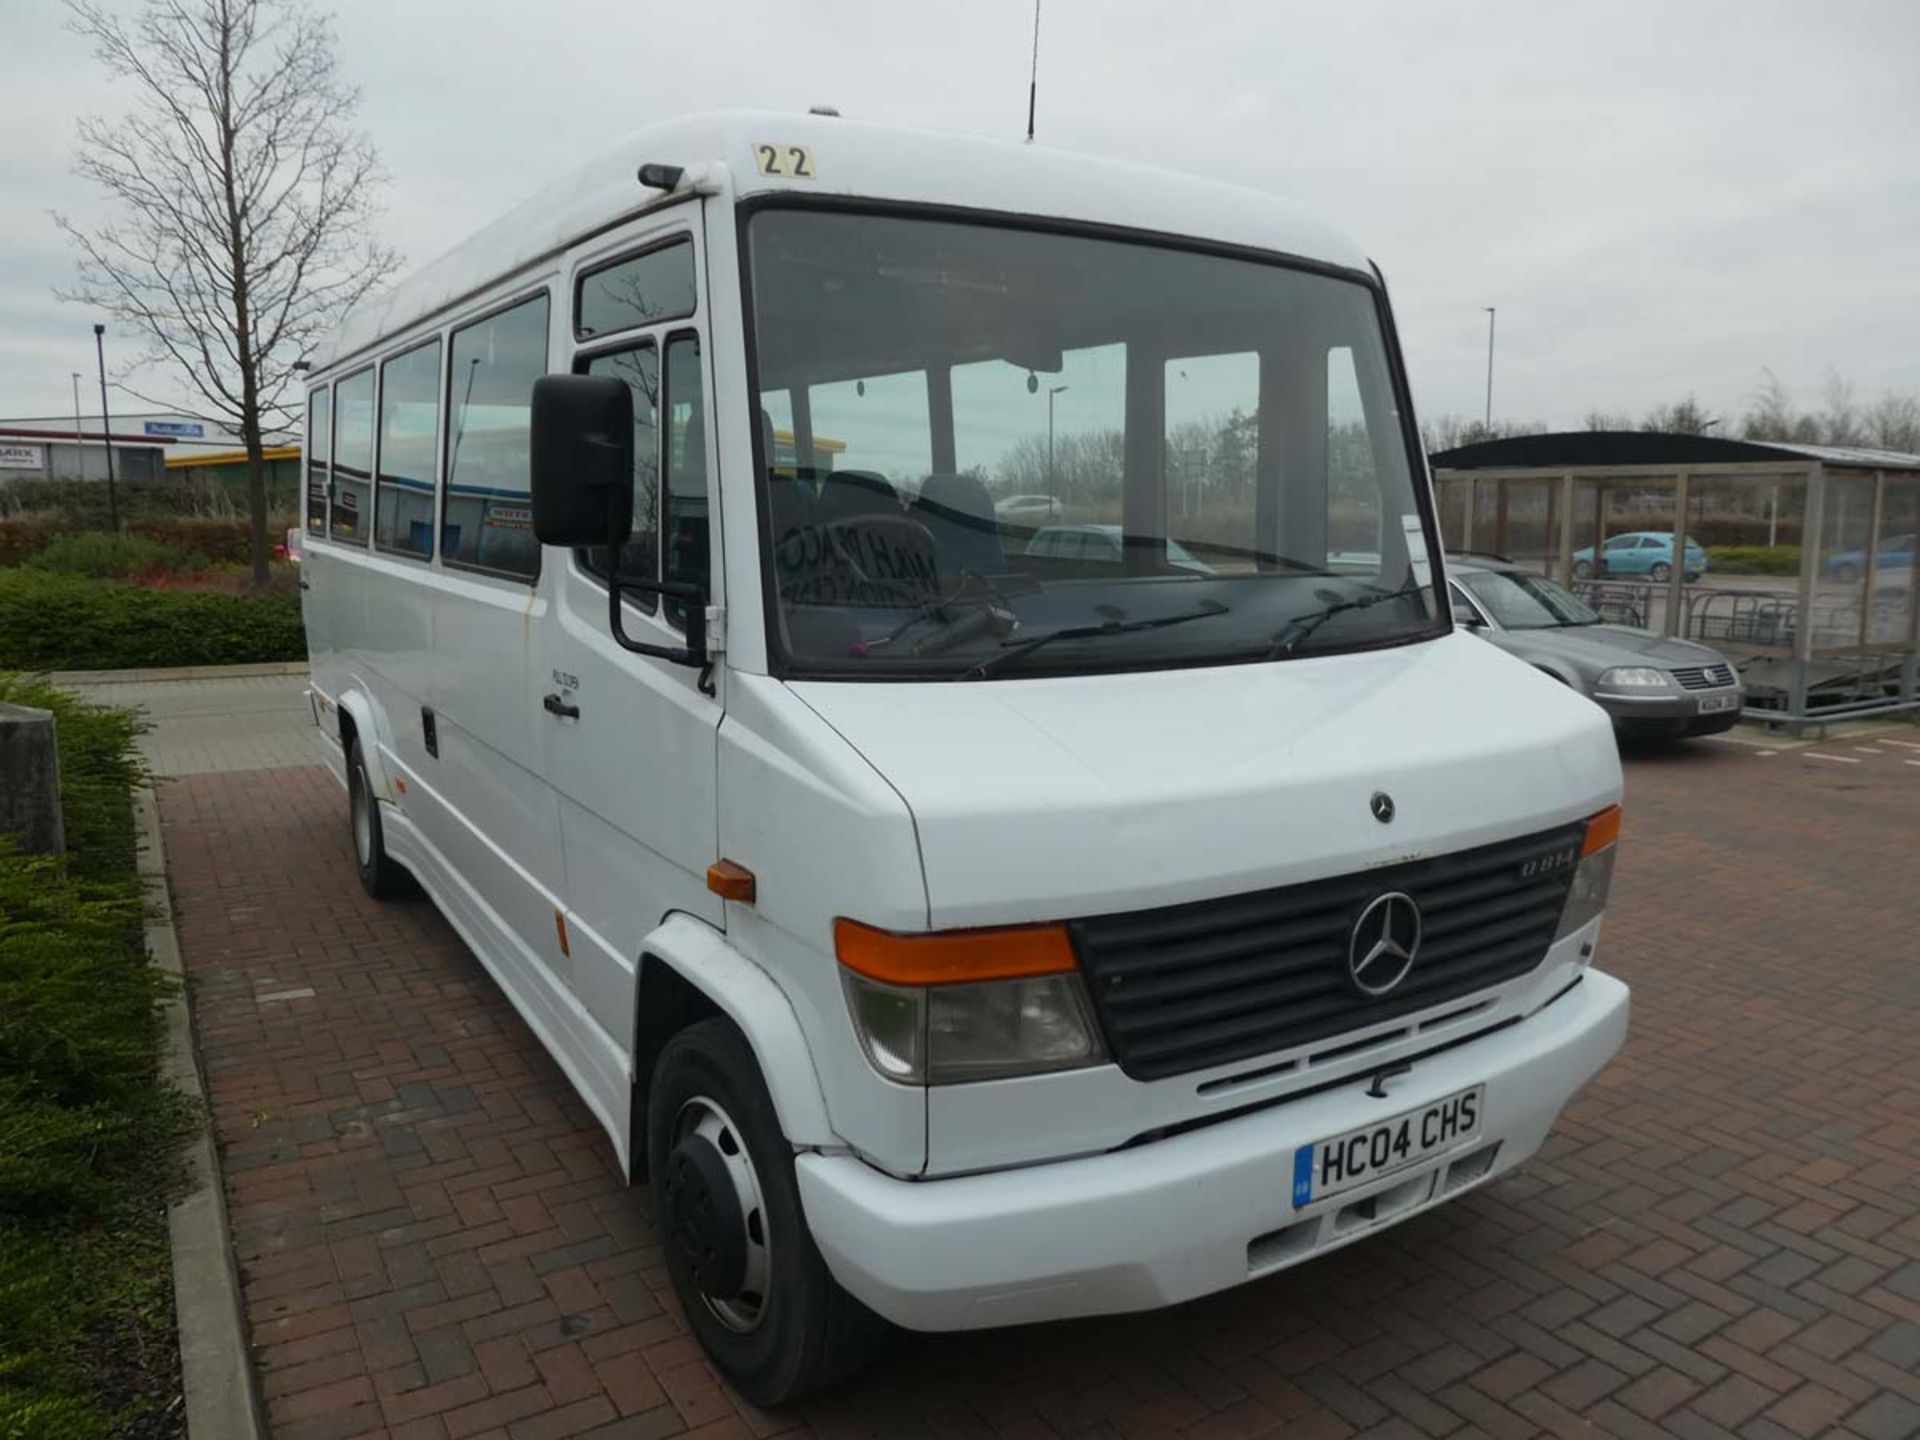 HC04 CHS (2004) Mercedes Vario 0814 24 seater minibus with 3972cc diesel engine. First registered - Image 7 of 7